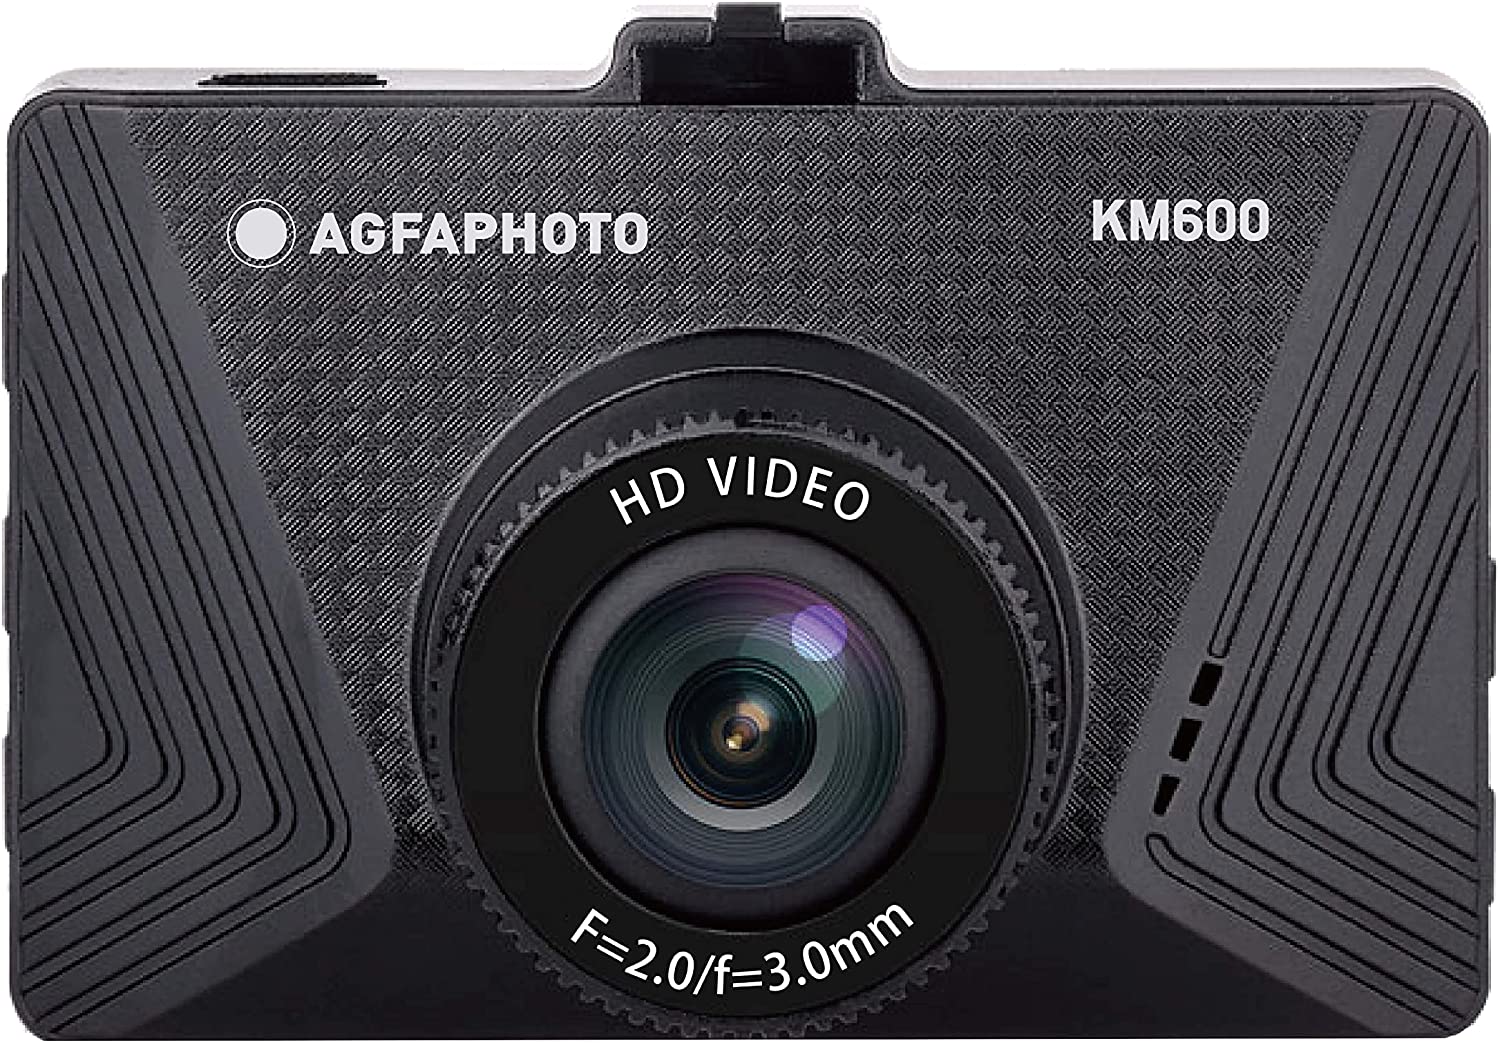 AgfaPhoto Realimove KM600 HD Dashcam | Car Camera with 2 Inch LCD Screen & 120° Wide Angle Lens